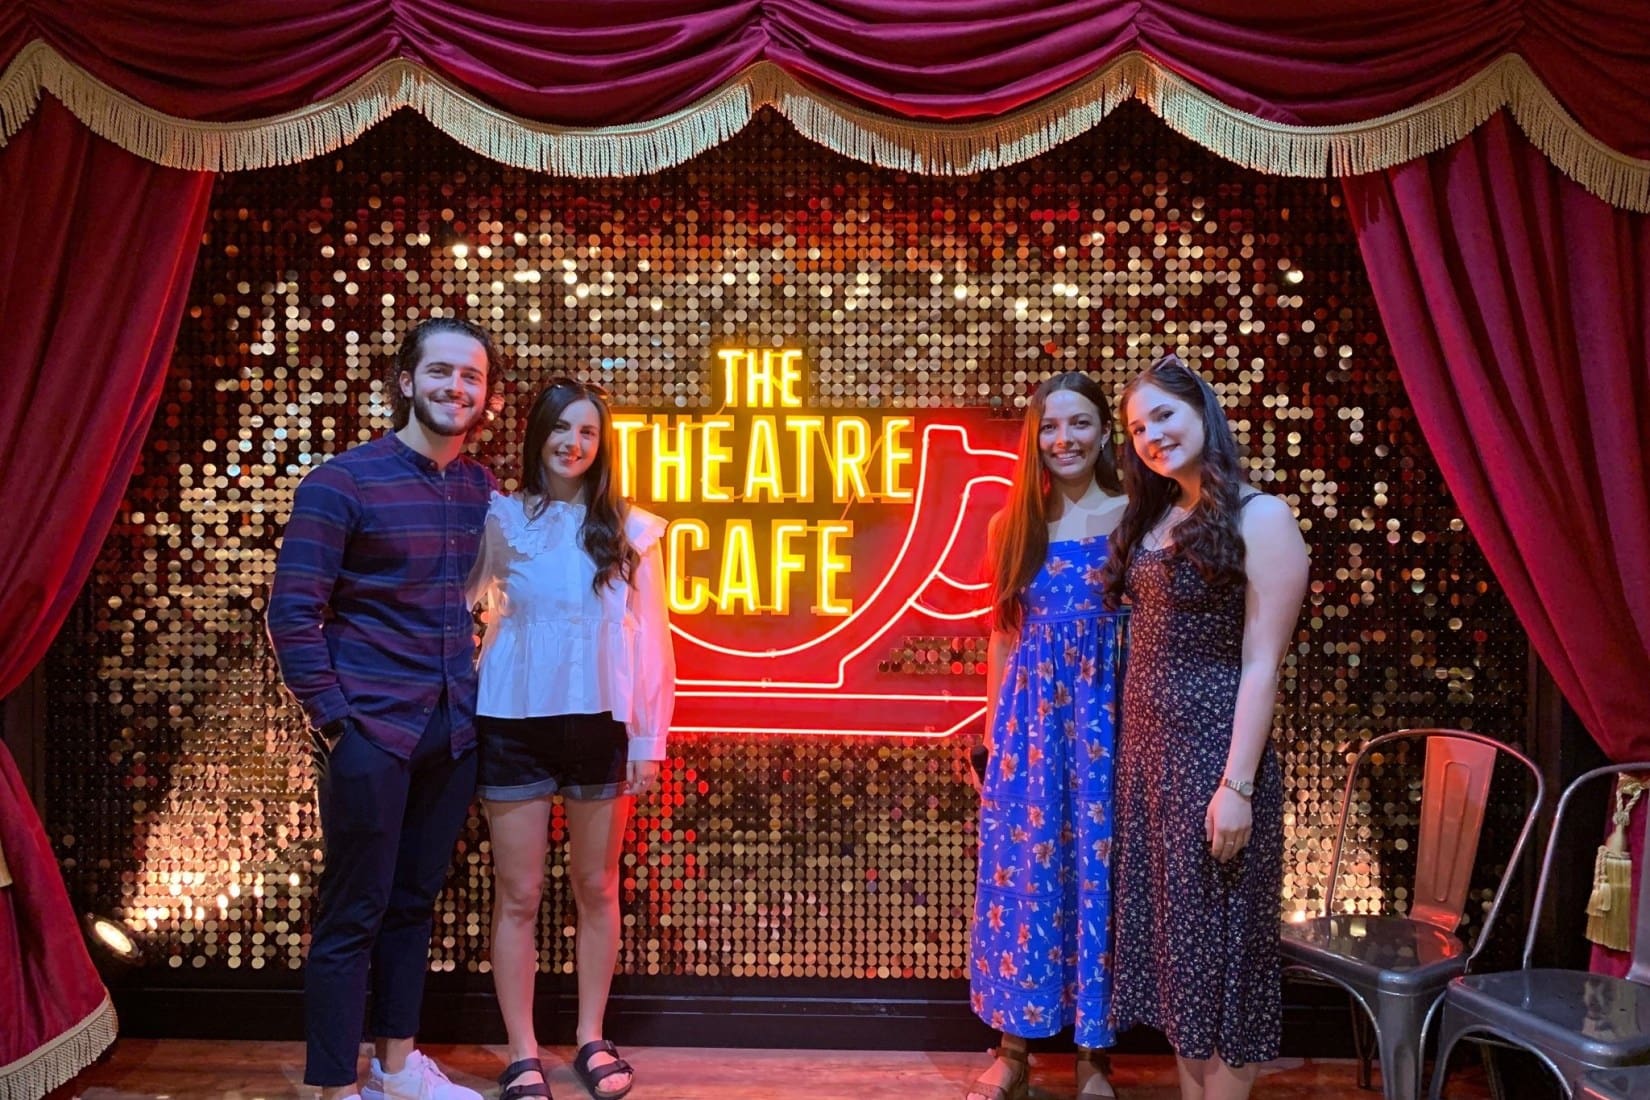 The cast of Fiddler on the Roof performed at The Theatre Café